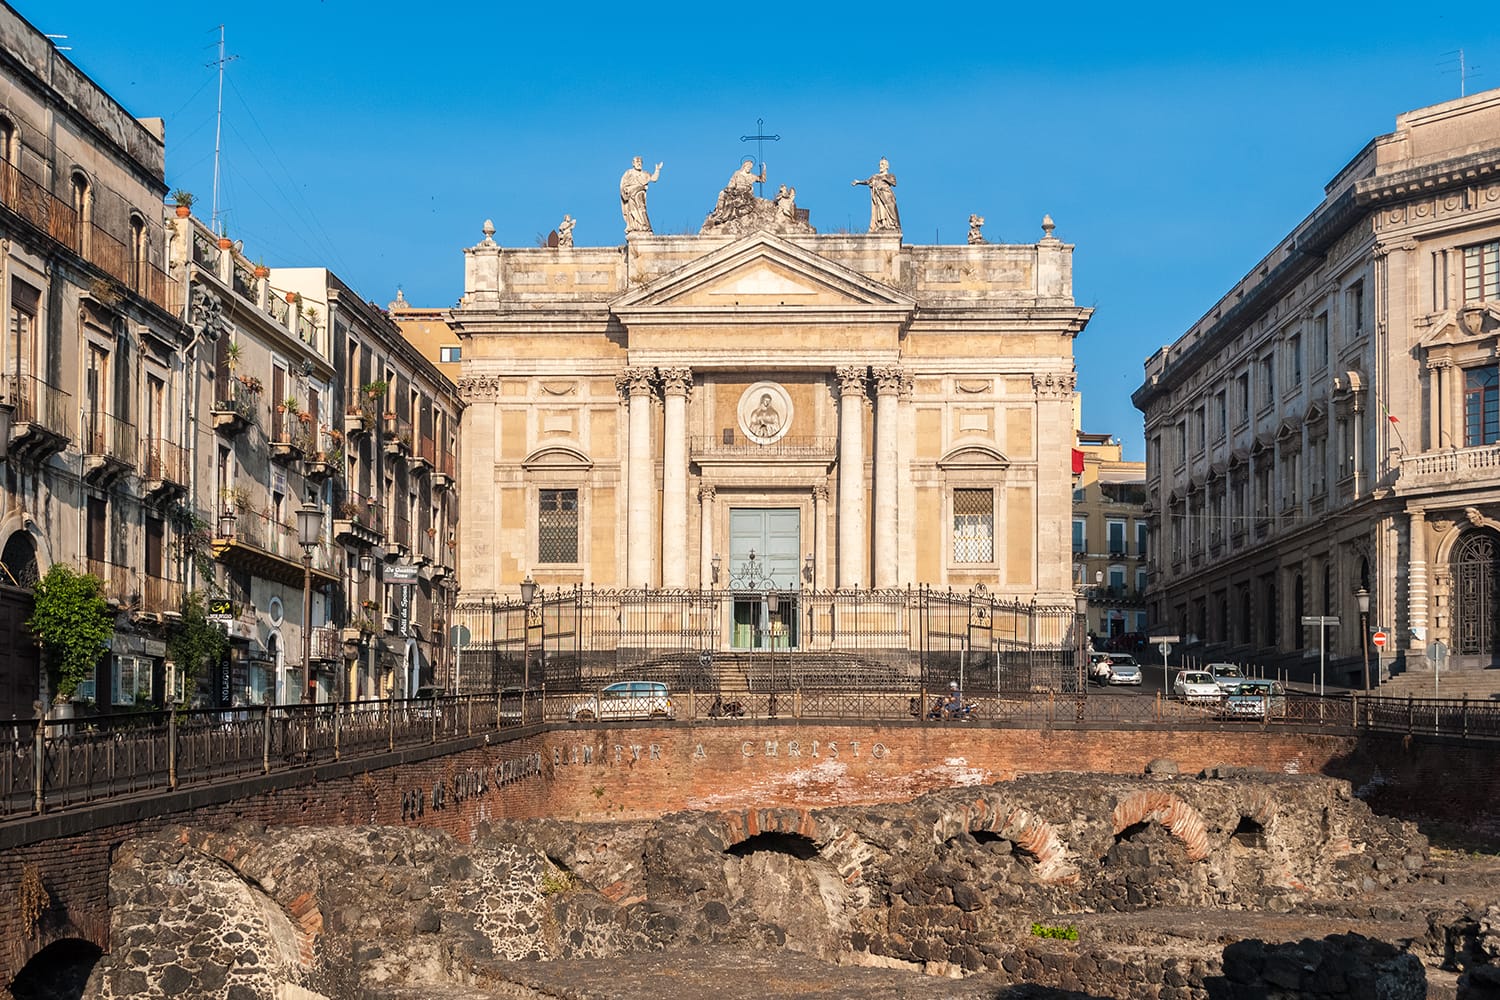 The church of San Biagio, known also as Sant'Agata alla Fornace, in Catania; in the foreground a glimpse of the roman amphitheatre